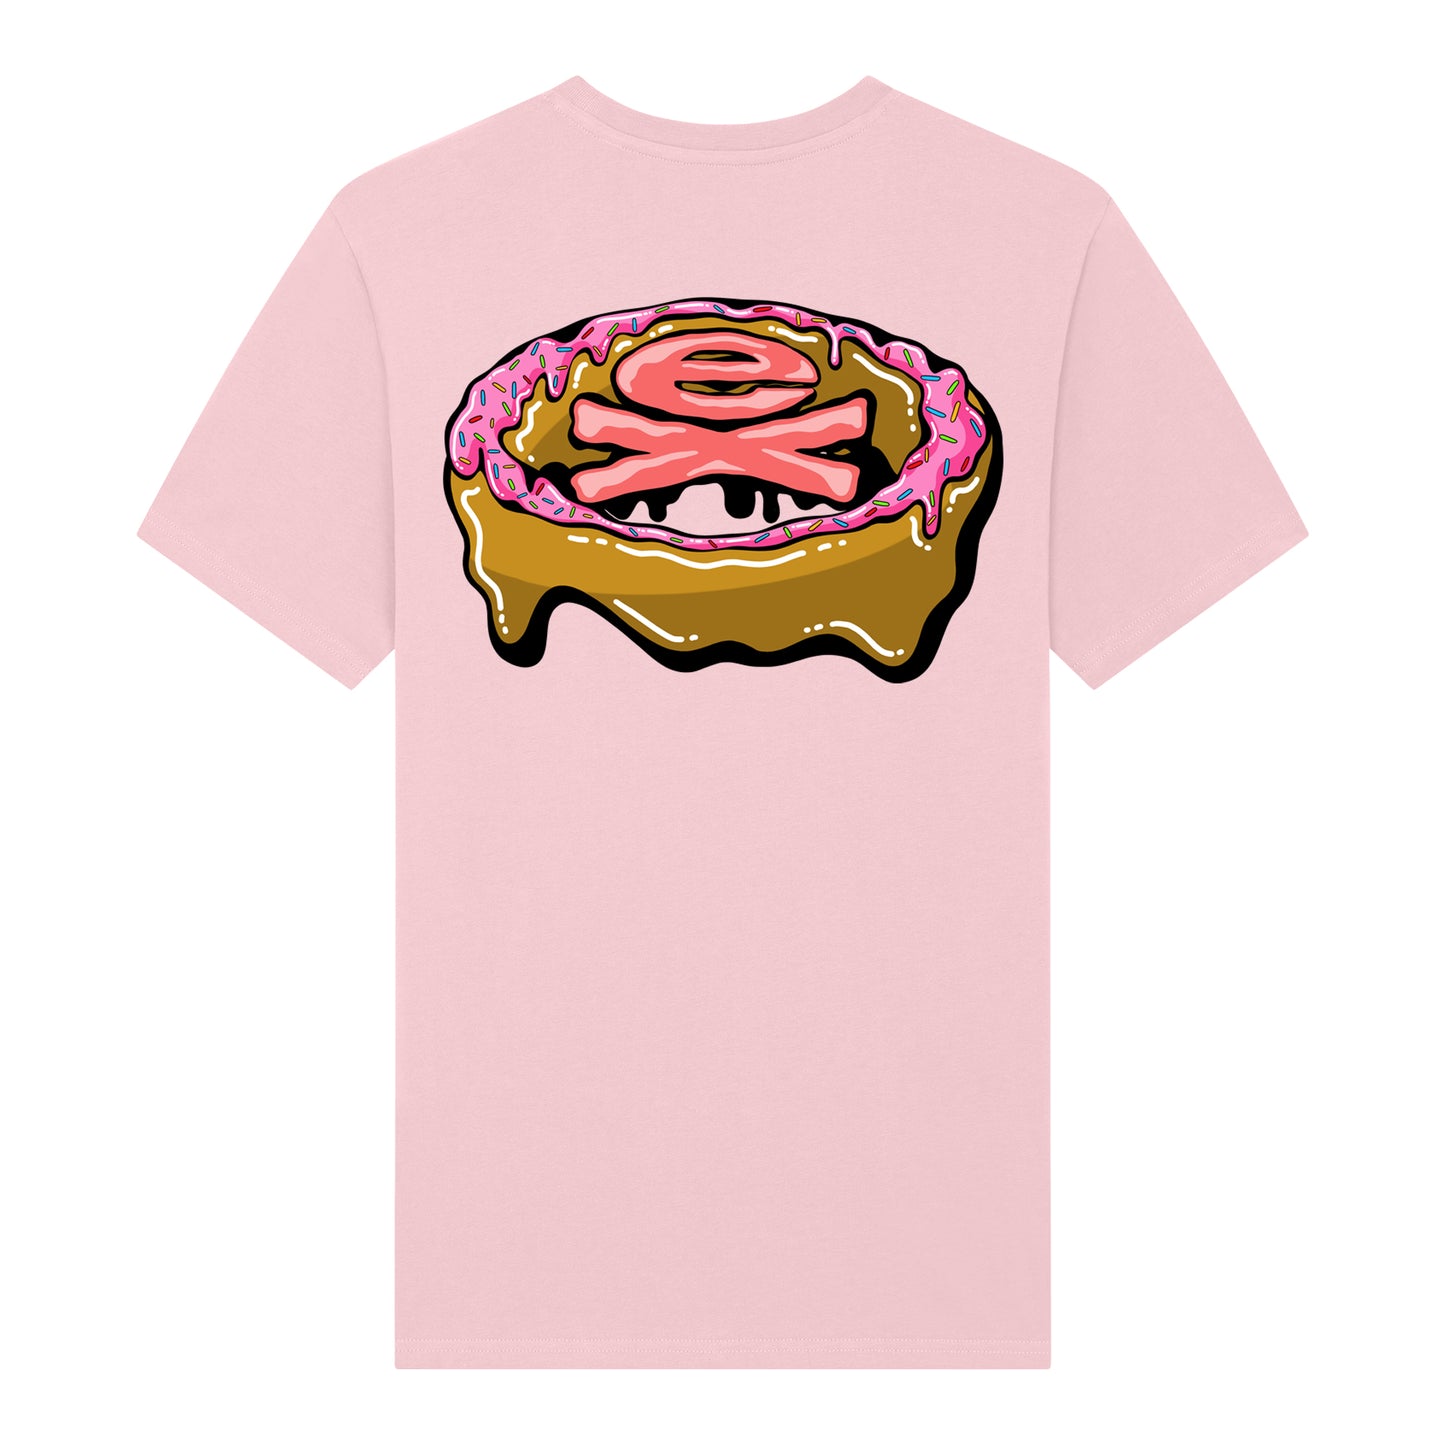 Go Nuts T-Shirt - Pink